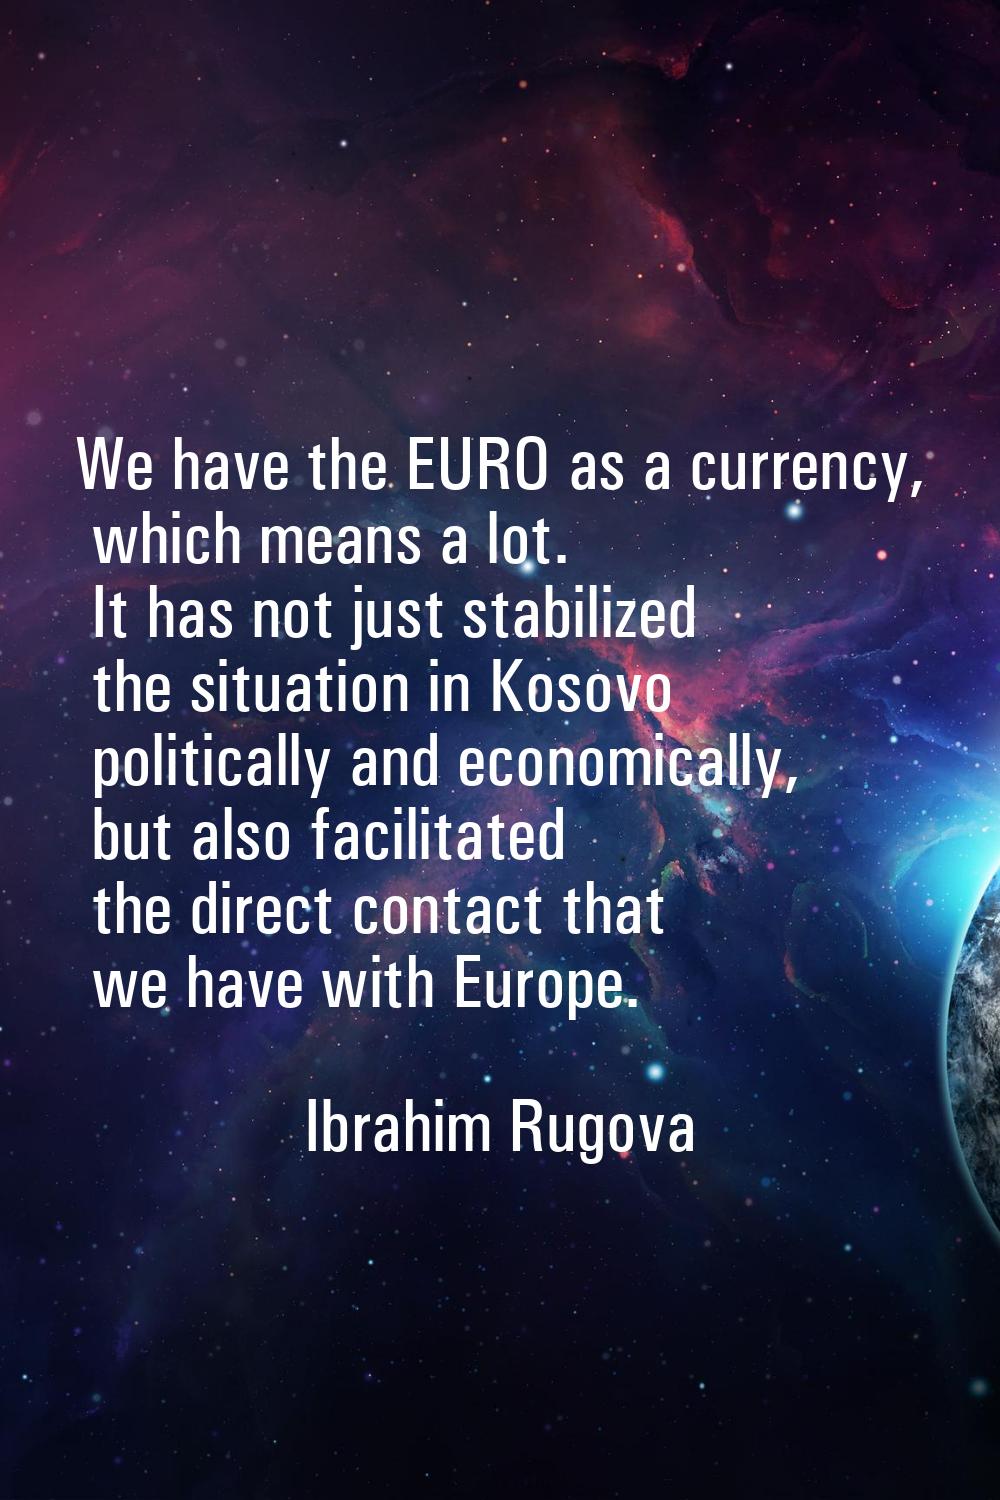 We have the EURO as a currency, which means a lot. It has not just stabilized the situation in Koso